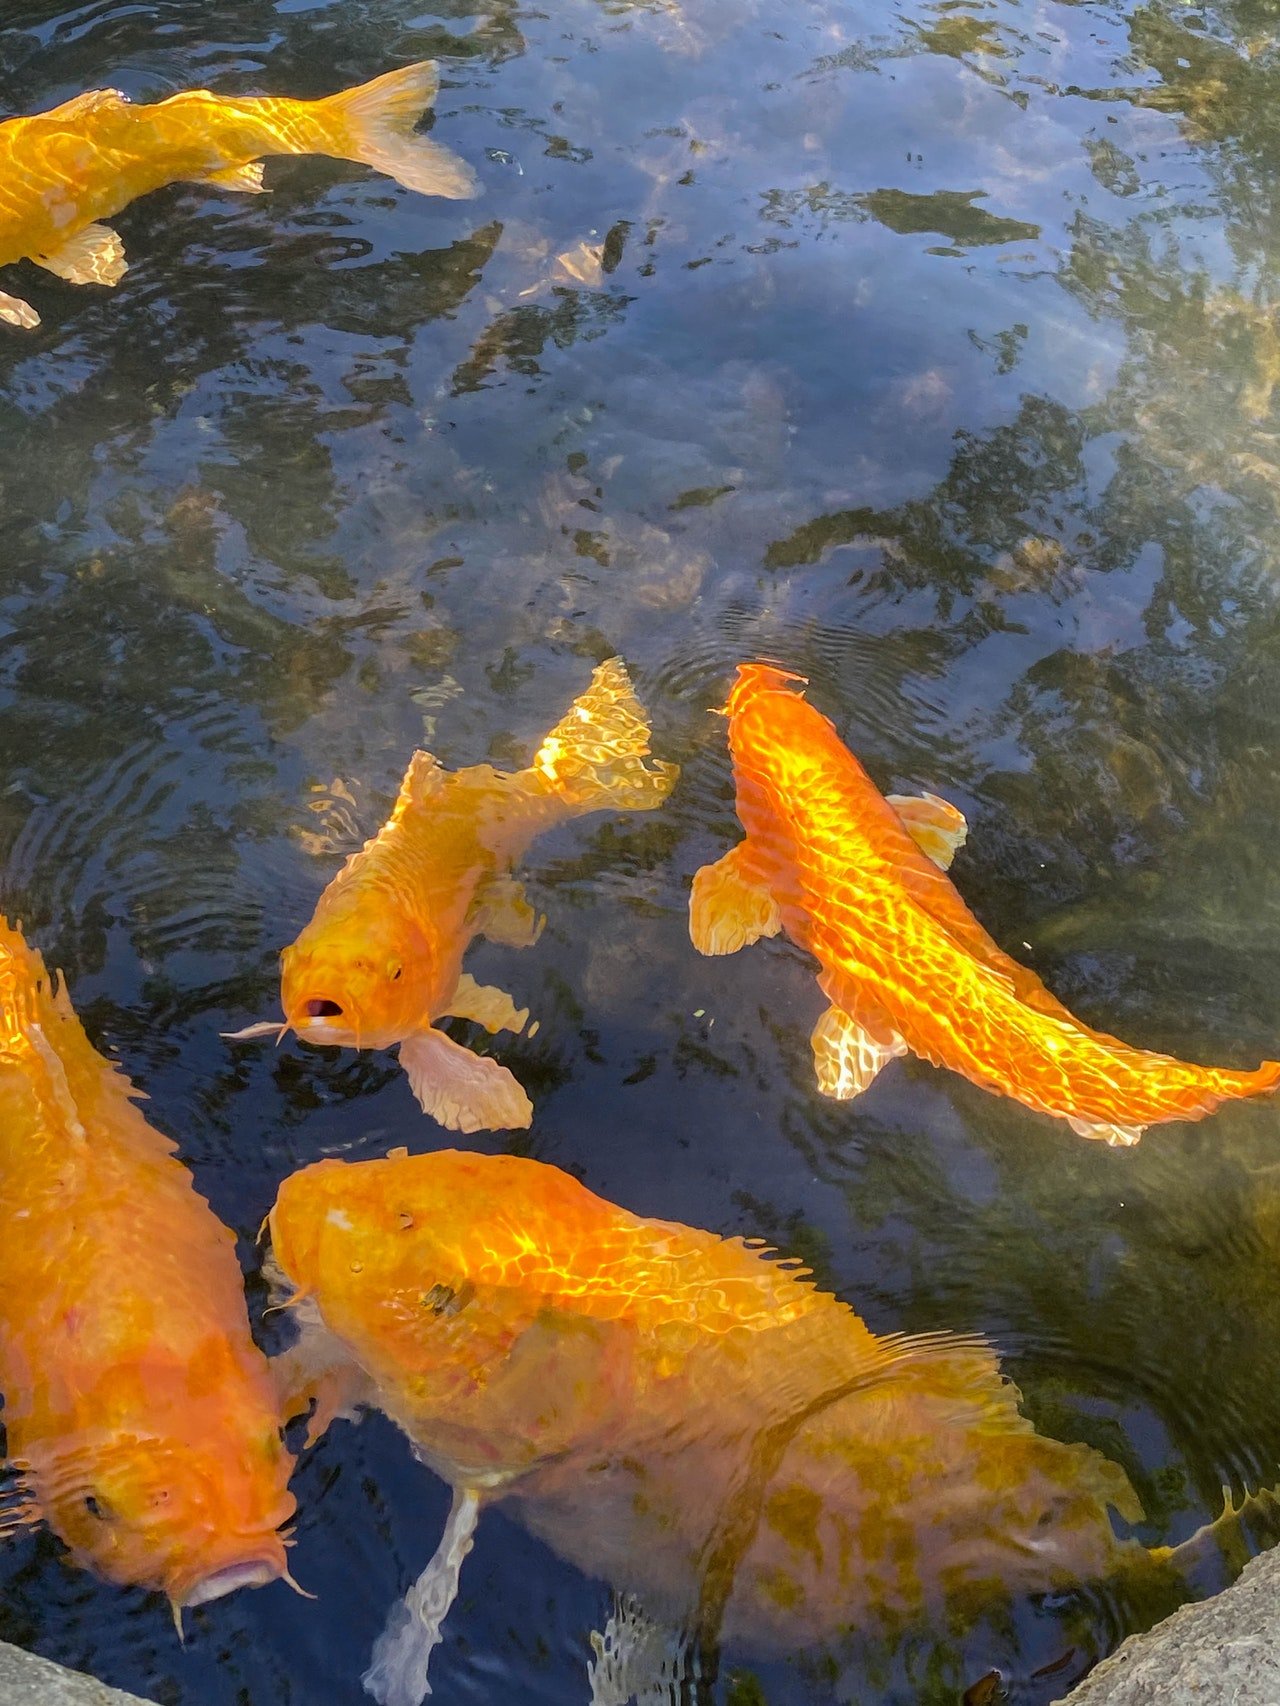 Photo of golden fishes in a pond | Photo: Pexels